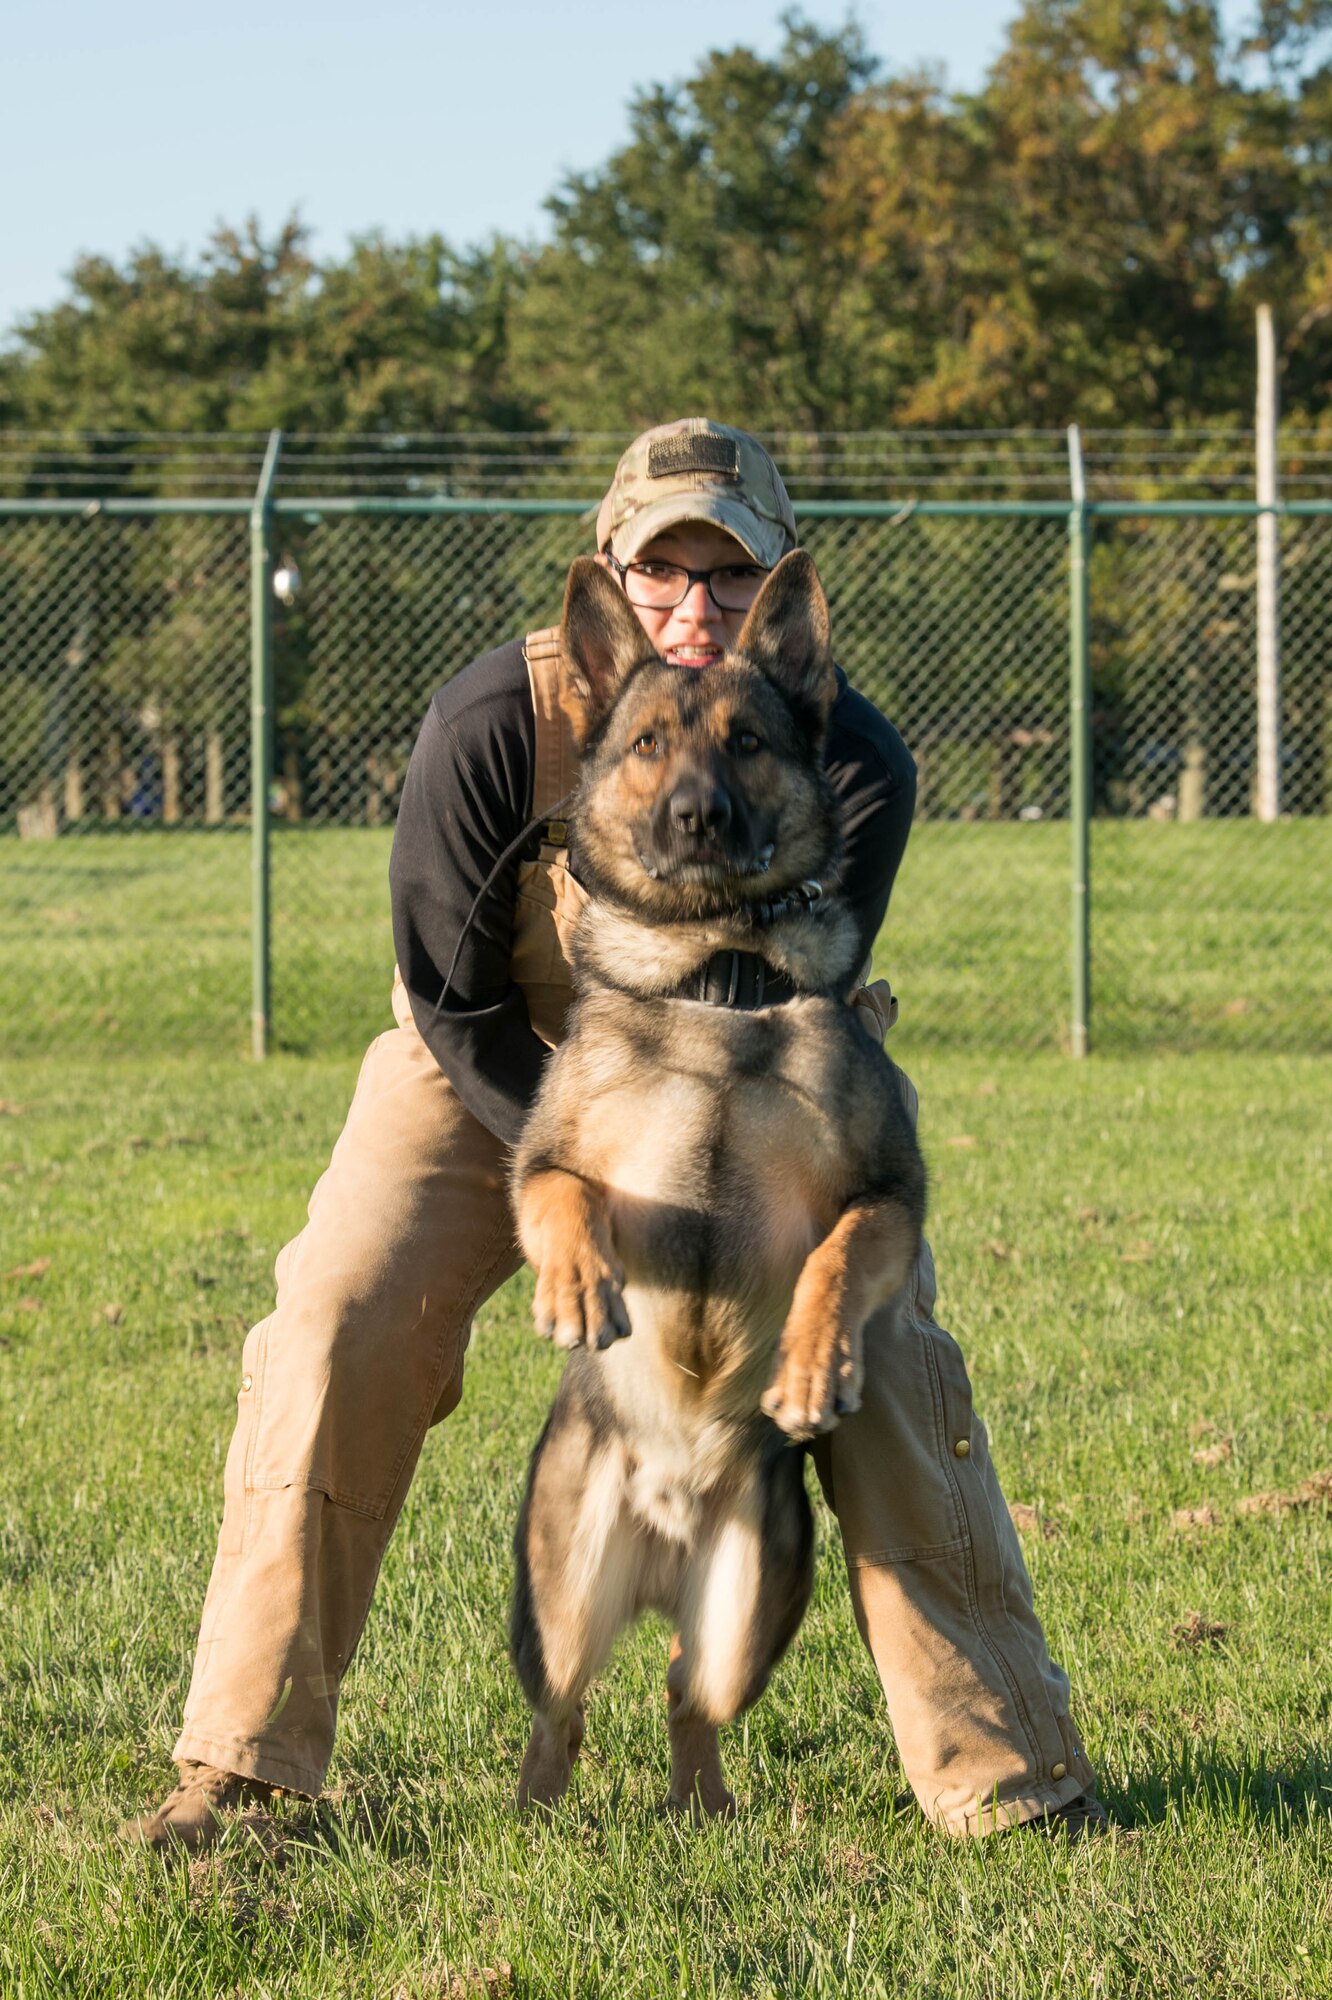 Senior Airman Theresa Braak, 436th Security Forces Squadron military working dog handler, and Military Working Dog Sam perform controlled aggression exercises Oct. 8, 2020, at Dover Air Force Base, Delaware. Obedience and control are fundamental aspects of the team’s working relationship. (U.S. Air Force photo by Mauricio Campino)